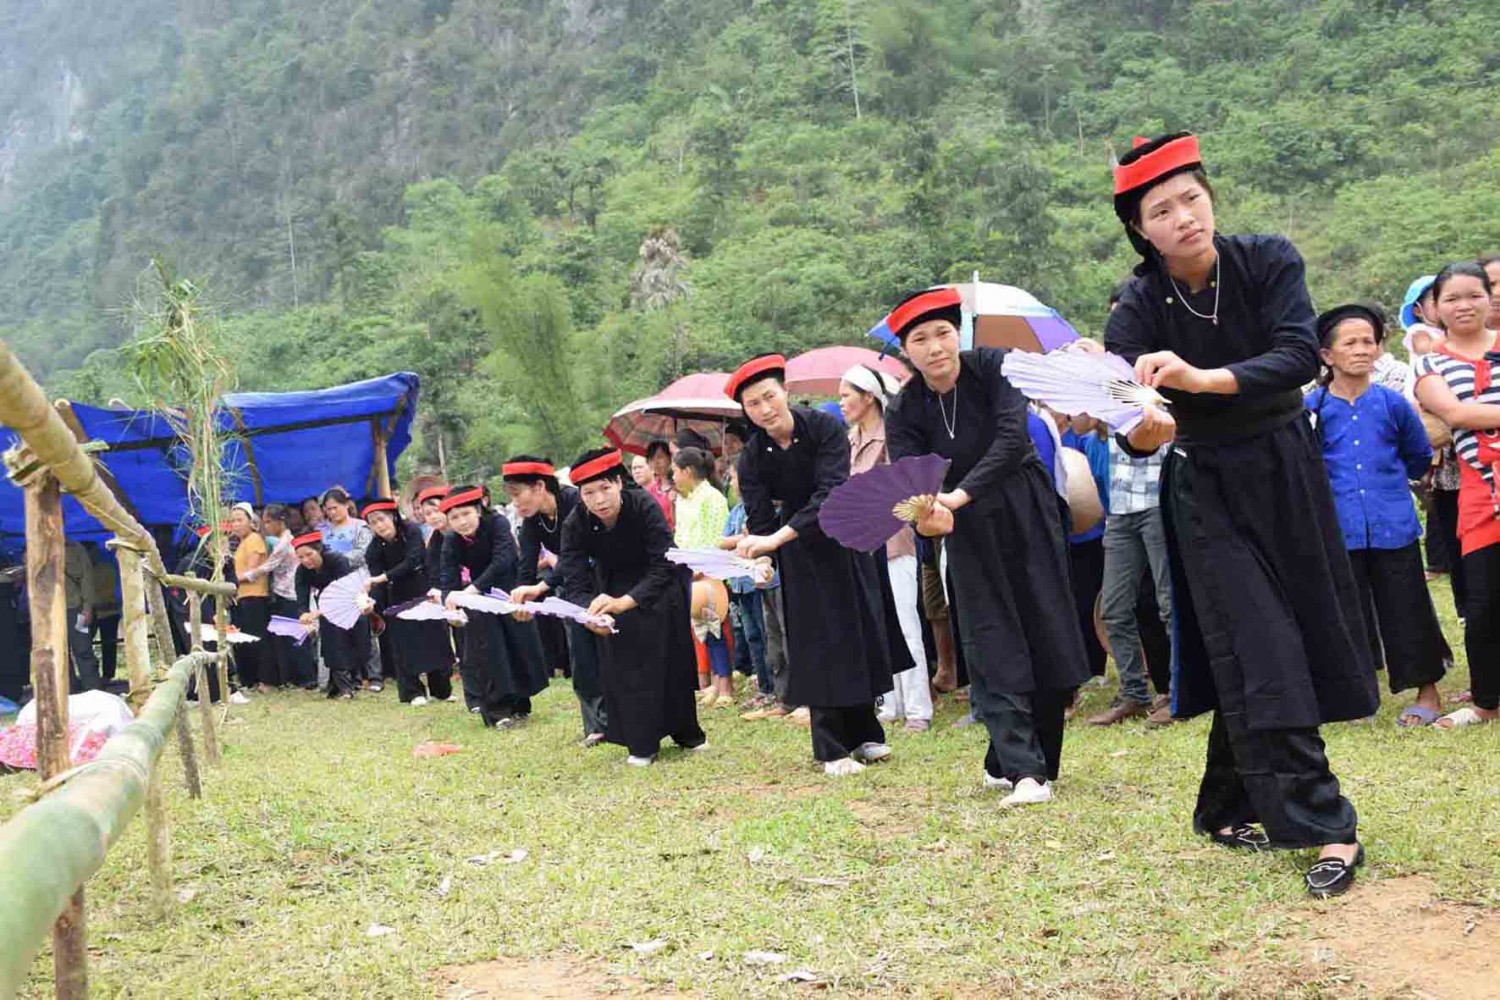 The dancing at the Festival in Chu Lang, Kim Dong, Thach An district.